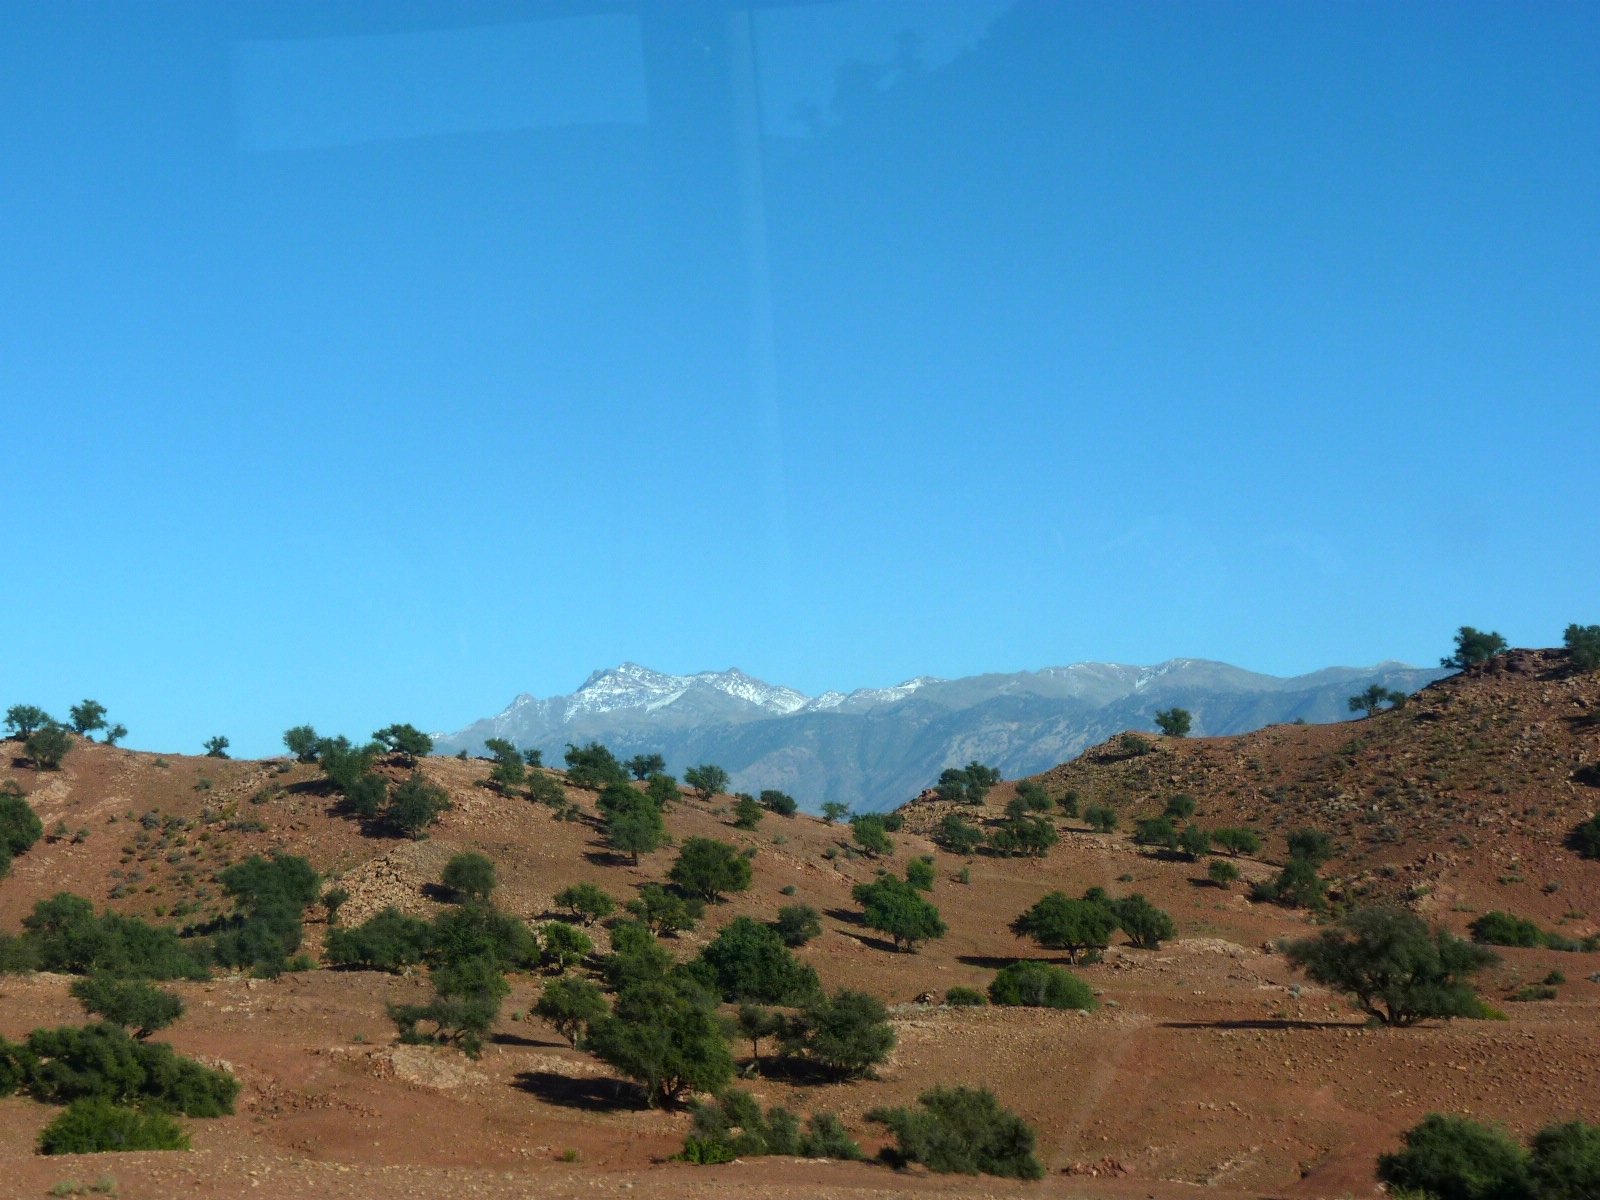 On the way to Marrakesh